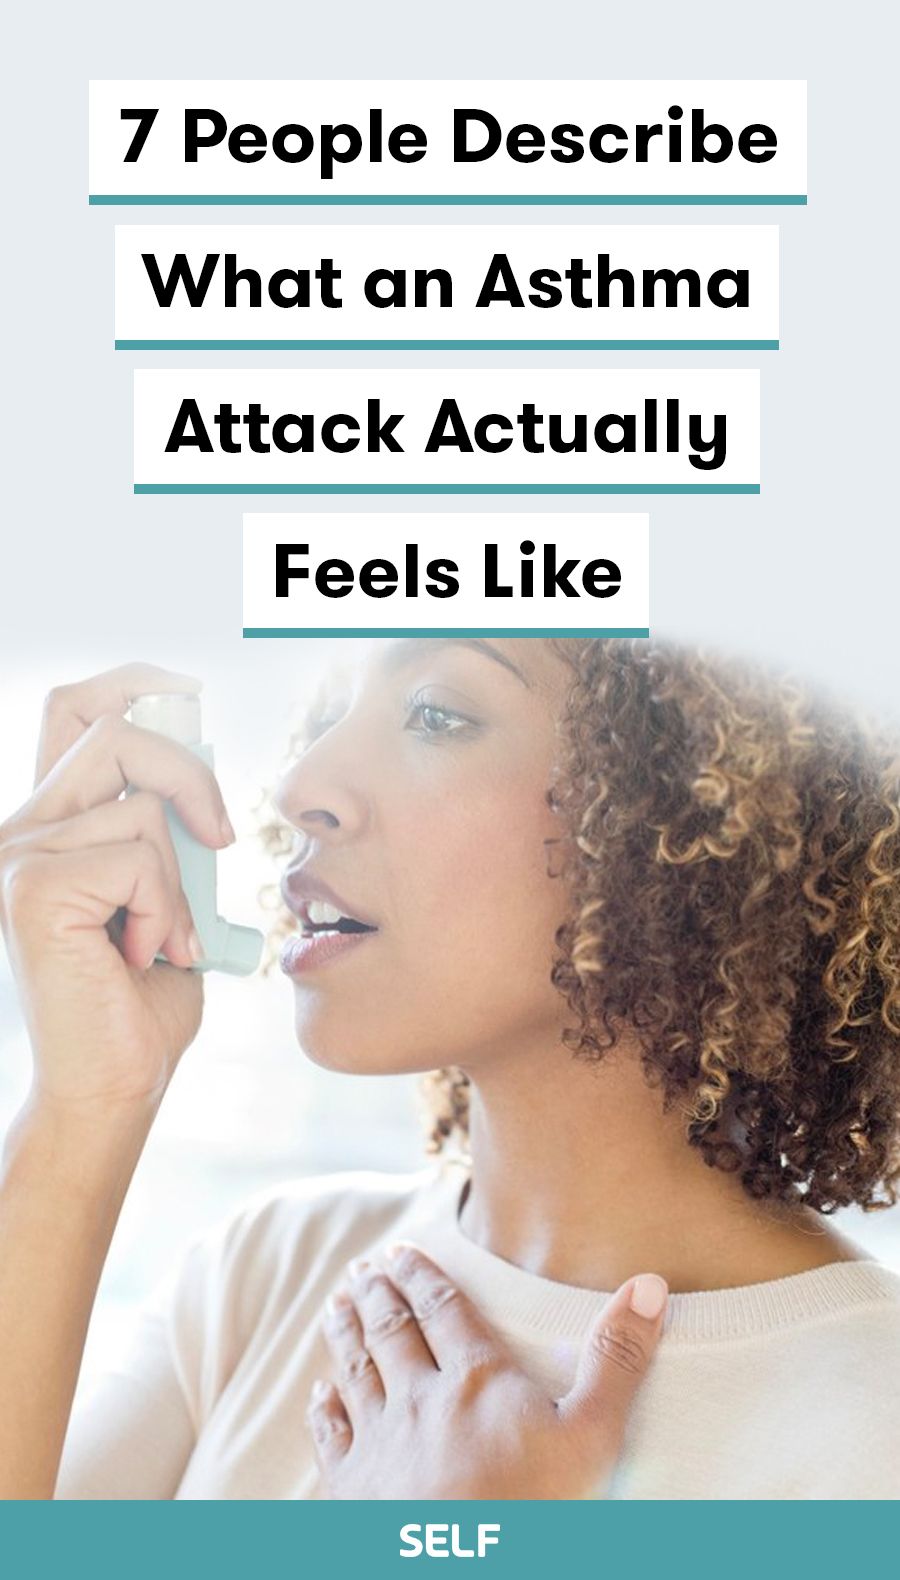 7 People Describe What an Asthma Attack Actually Feels Like